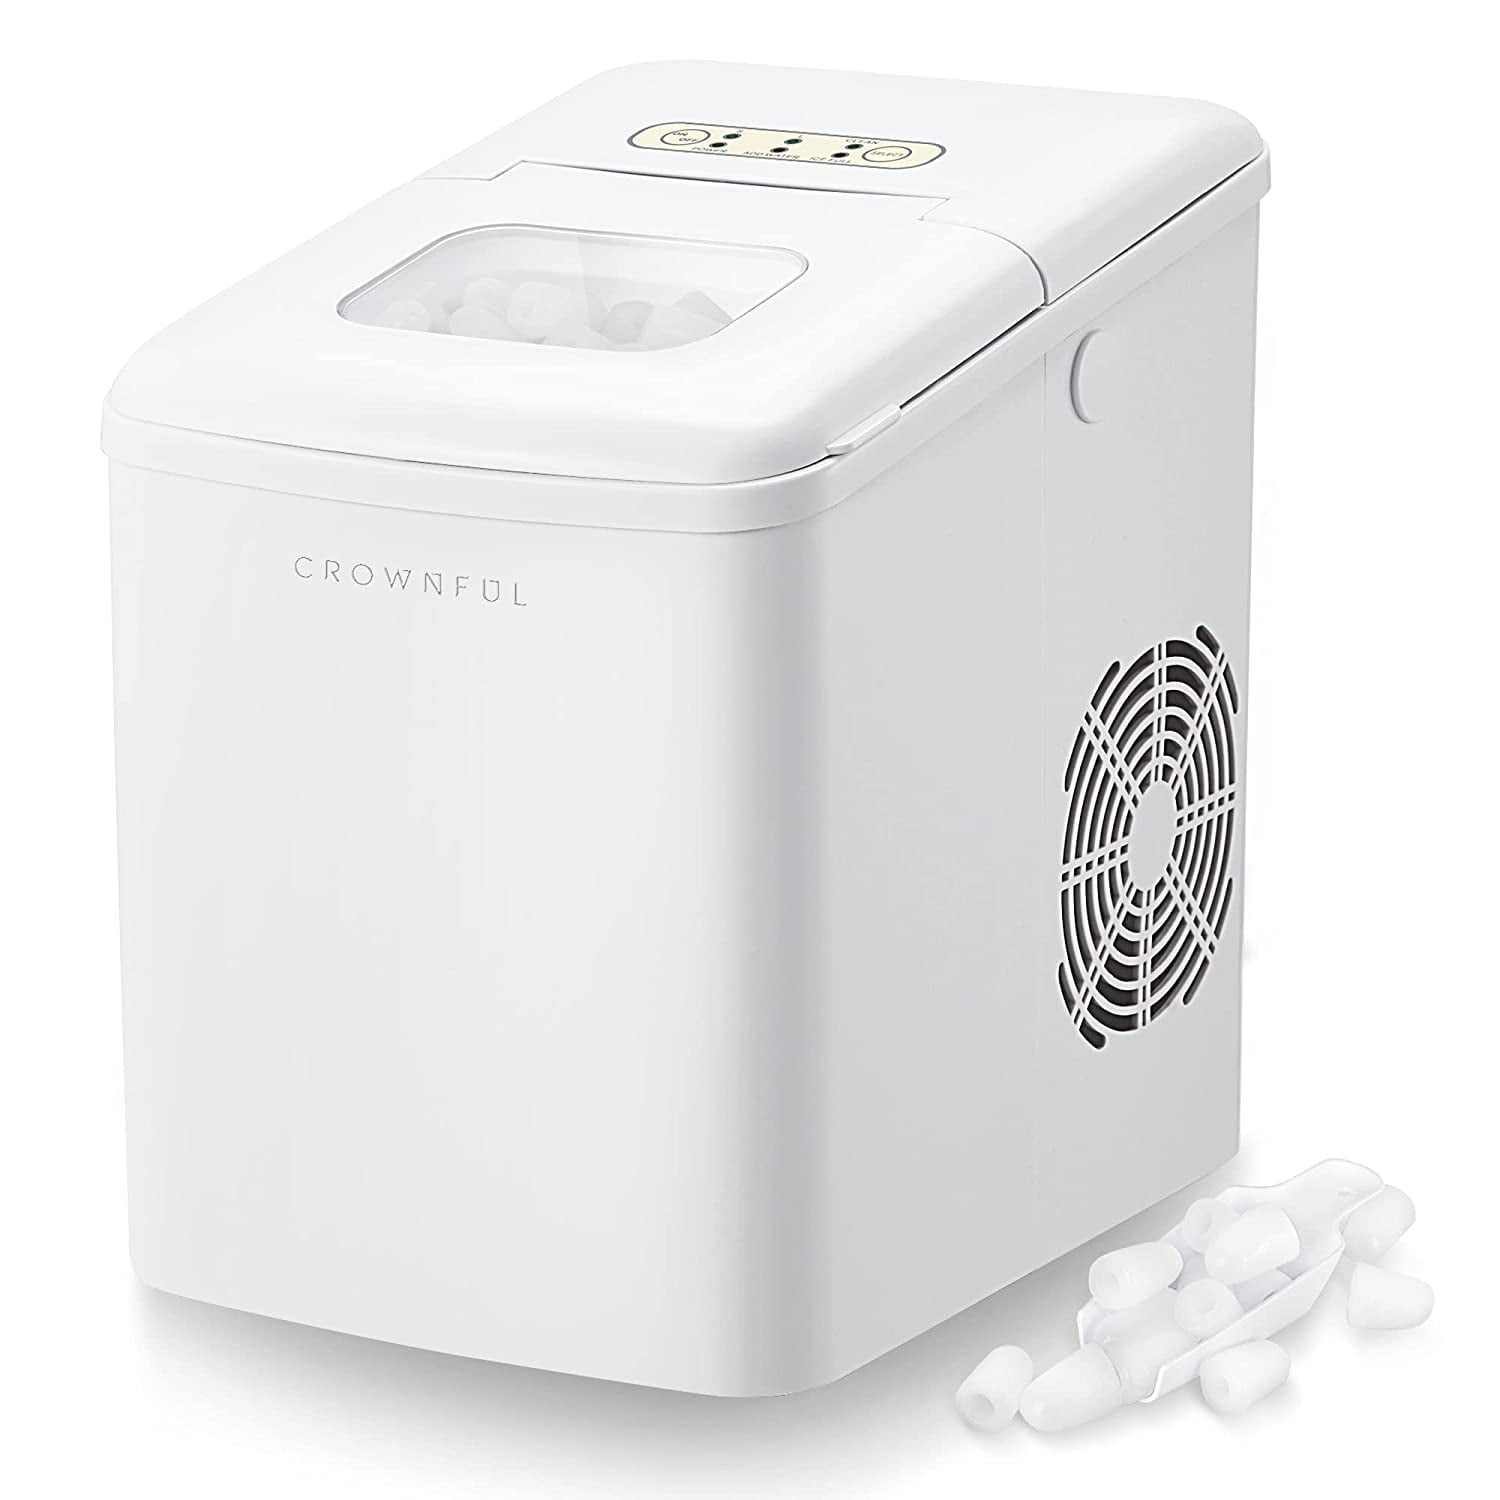 Blue Zlinke Portable Ice Maker Countertop Machine,26Lbs/24H,9 Ice Cubes Ready in 8 Minutes,2L Water Tank 